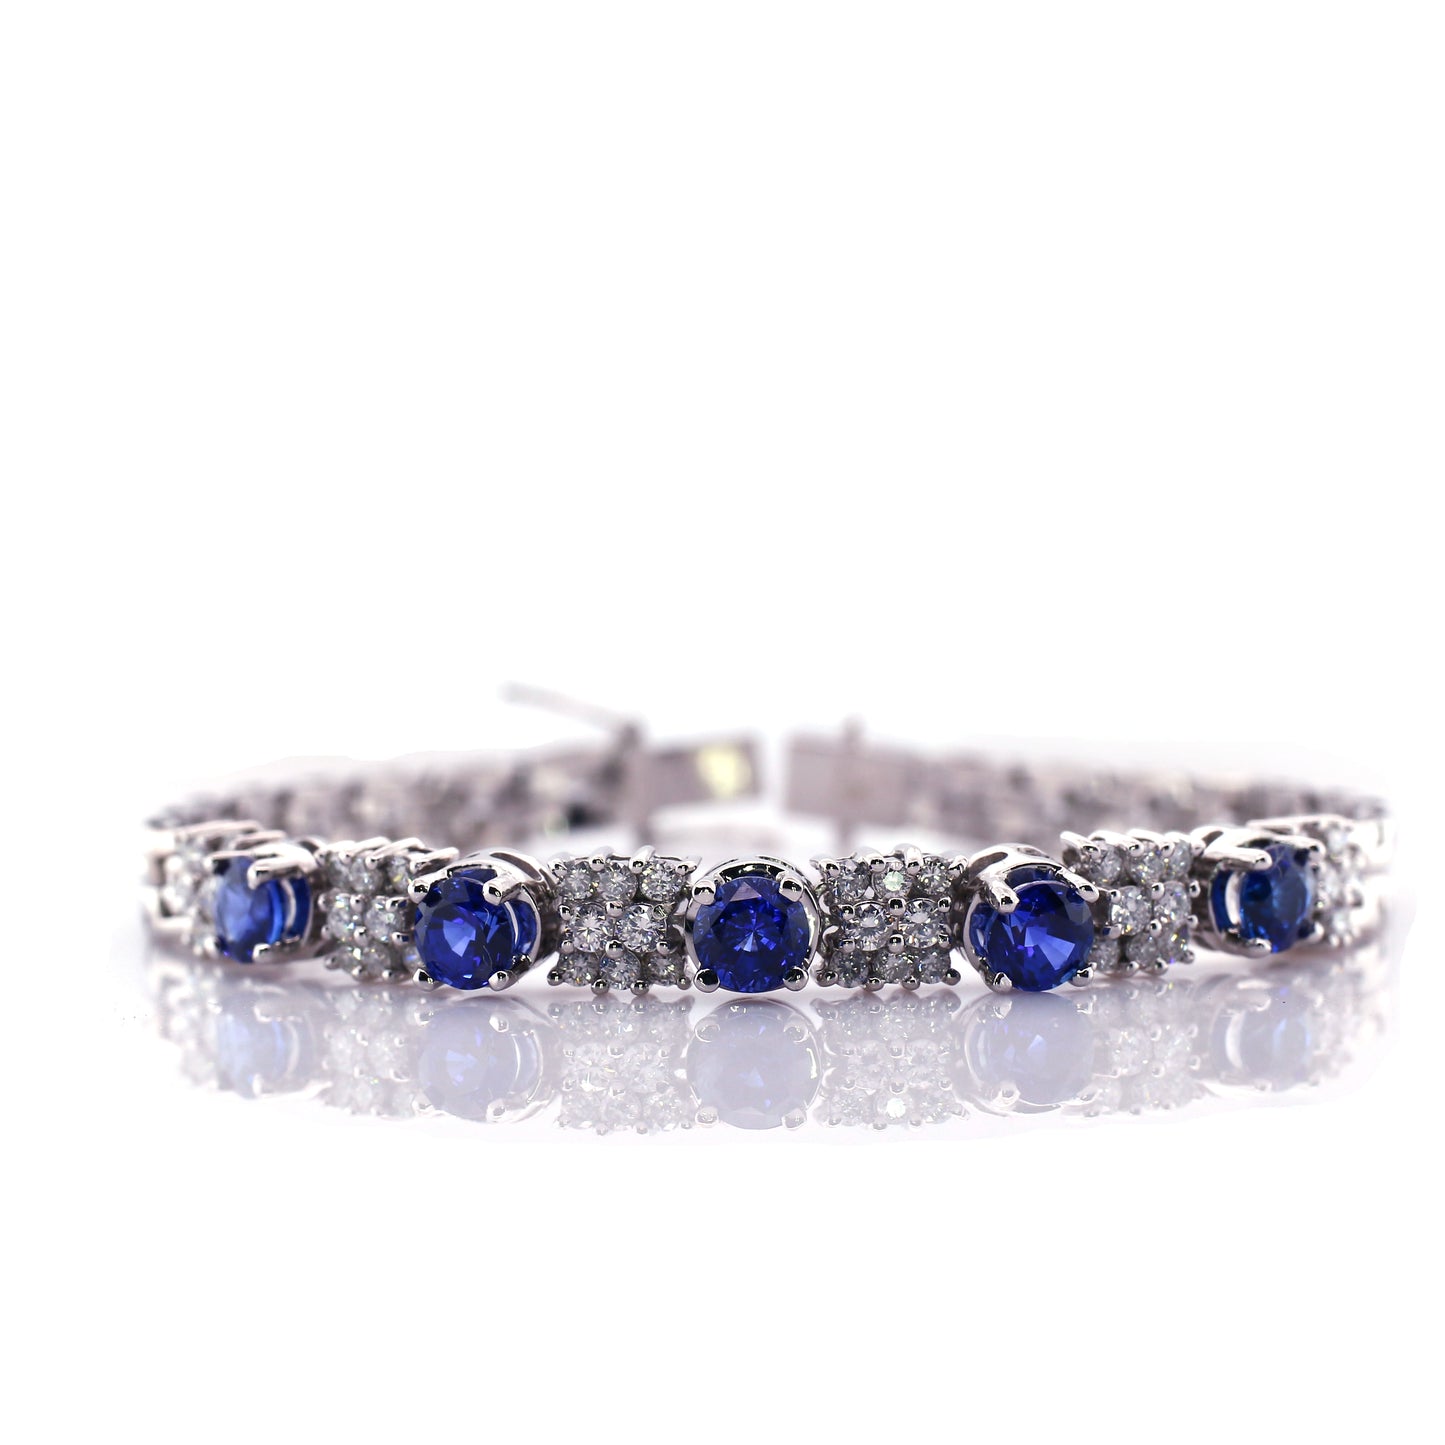 CHARMING BLUE SAPPHIRE WITH DIAMOND BRACELET FOR ALL OCCASIONS